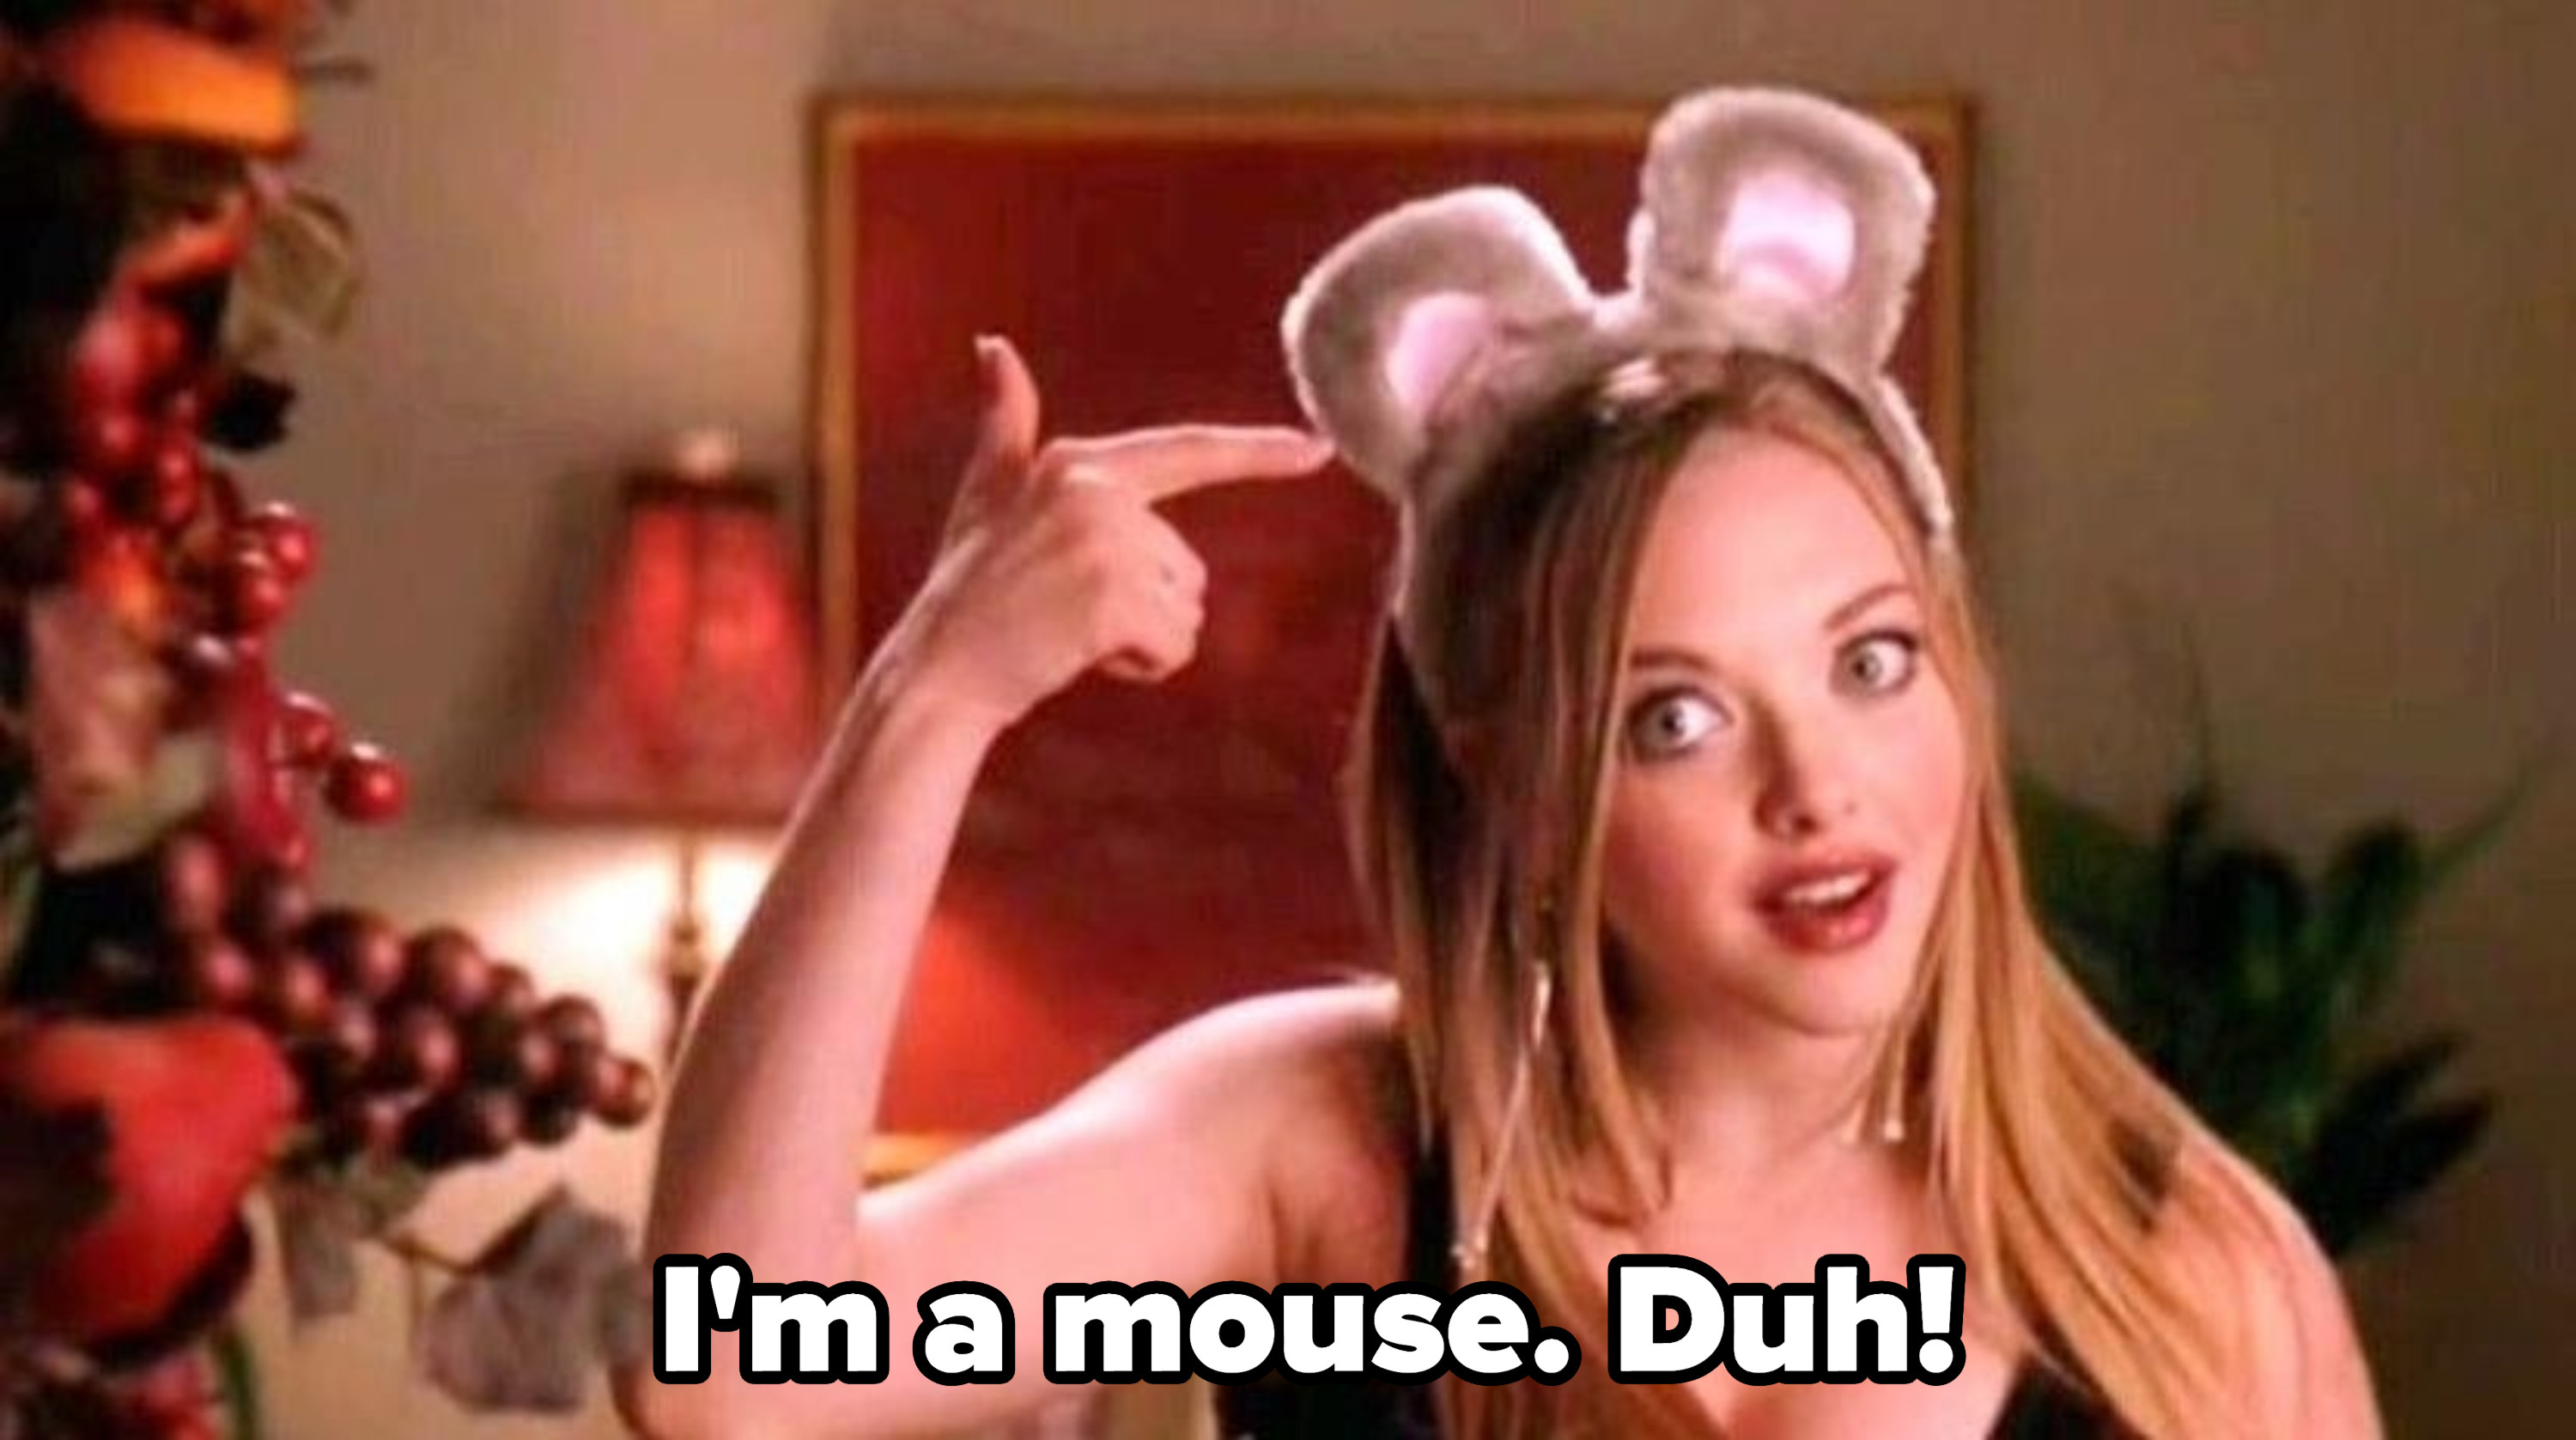 Karen showing off her Halloween costume: &quot;I&#x27;m a mouse. Duh!&quot;